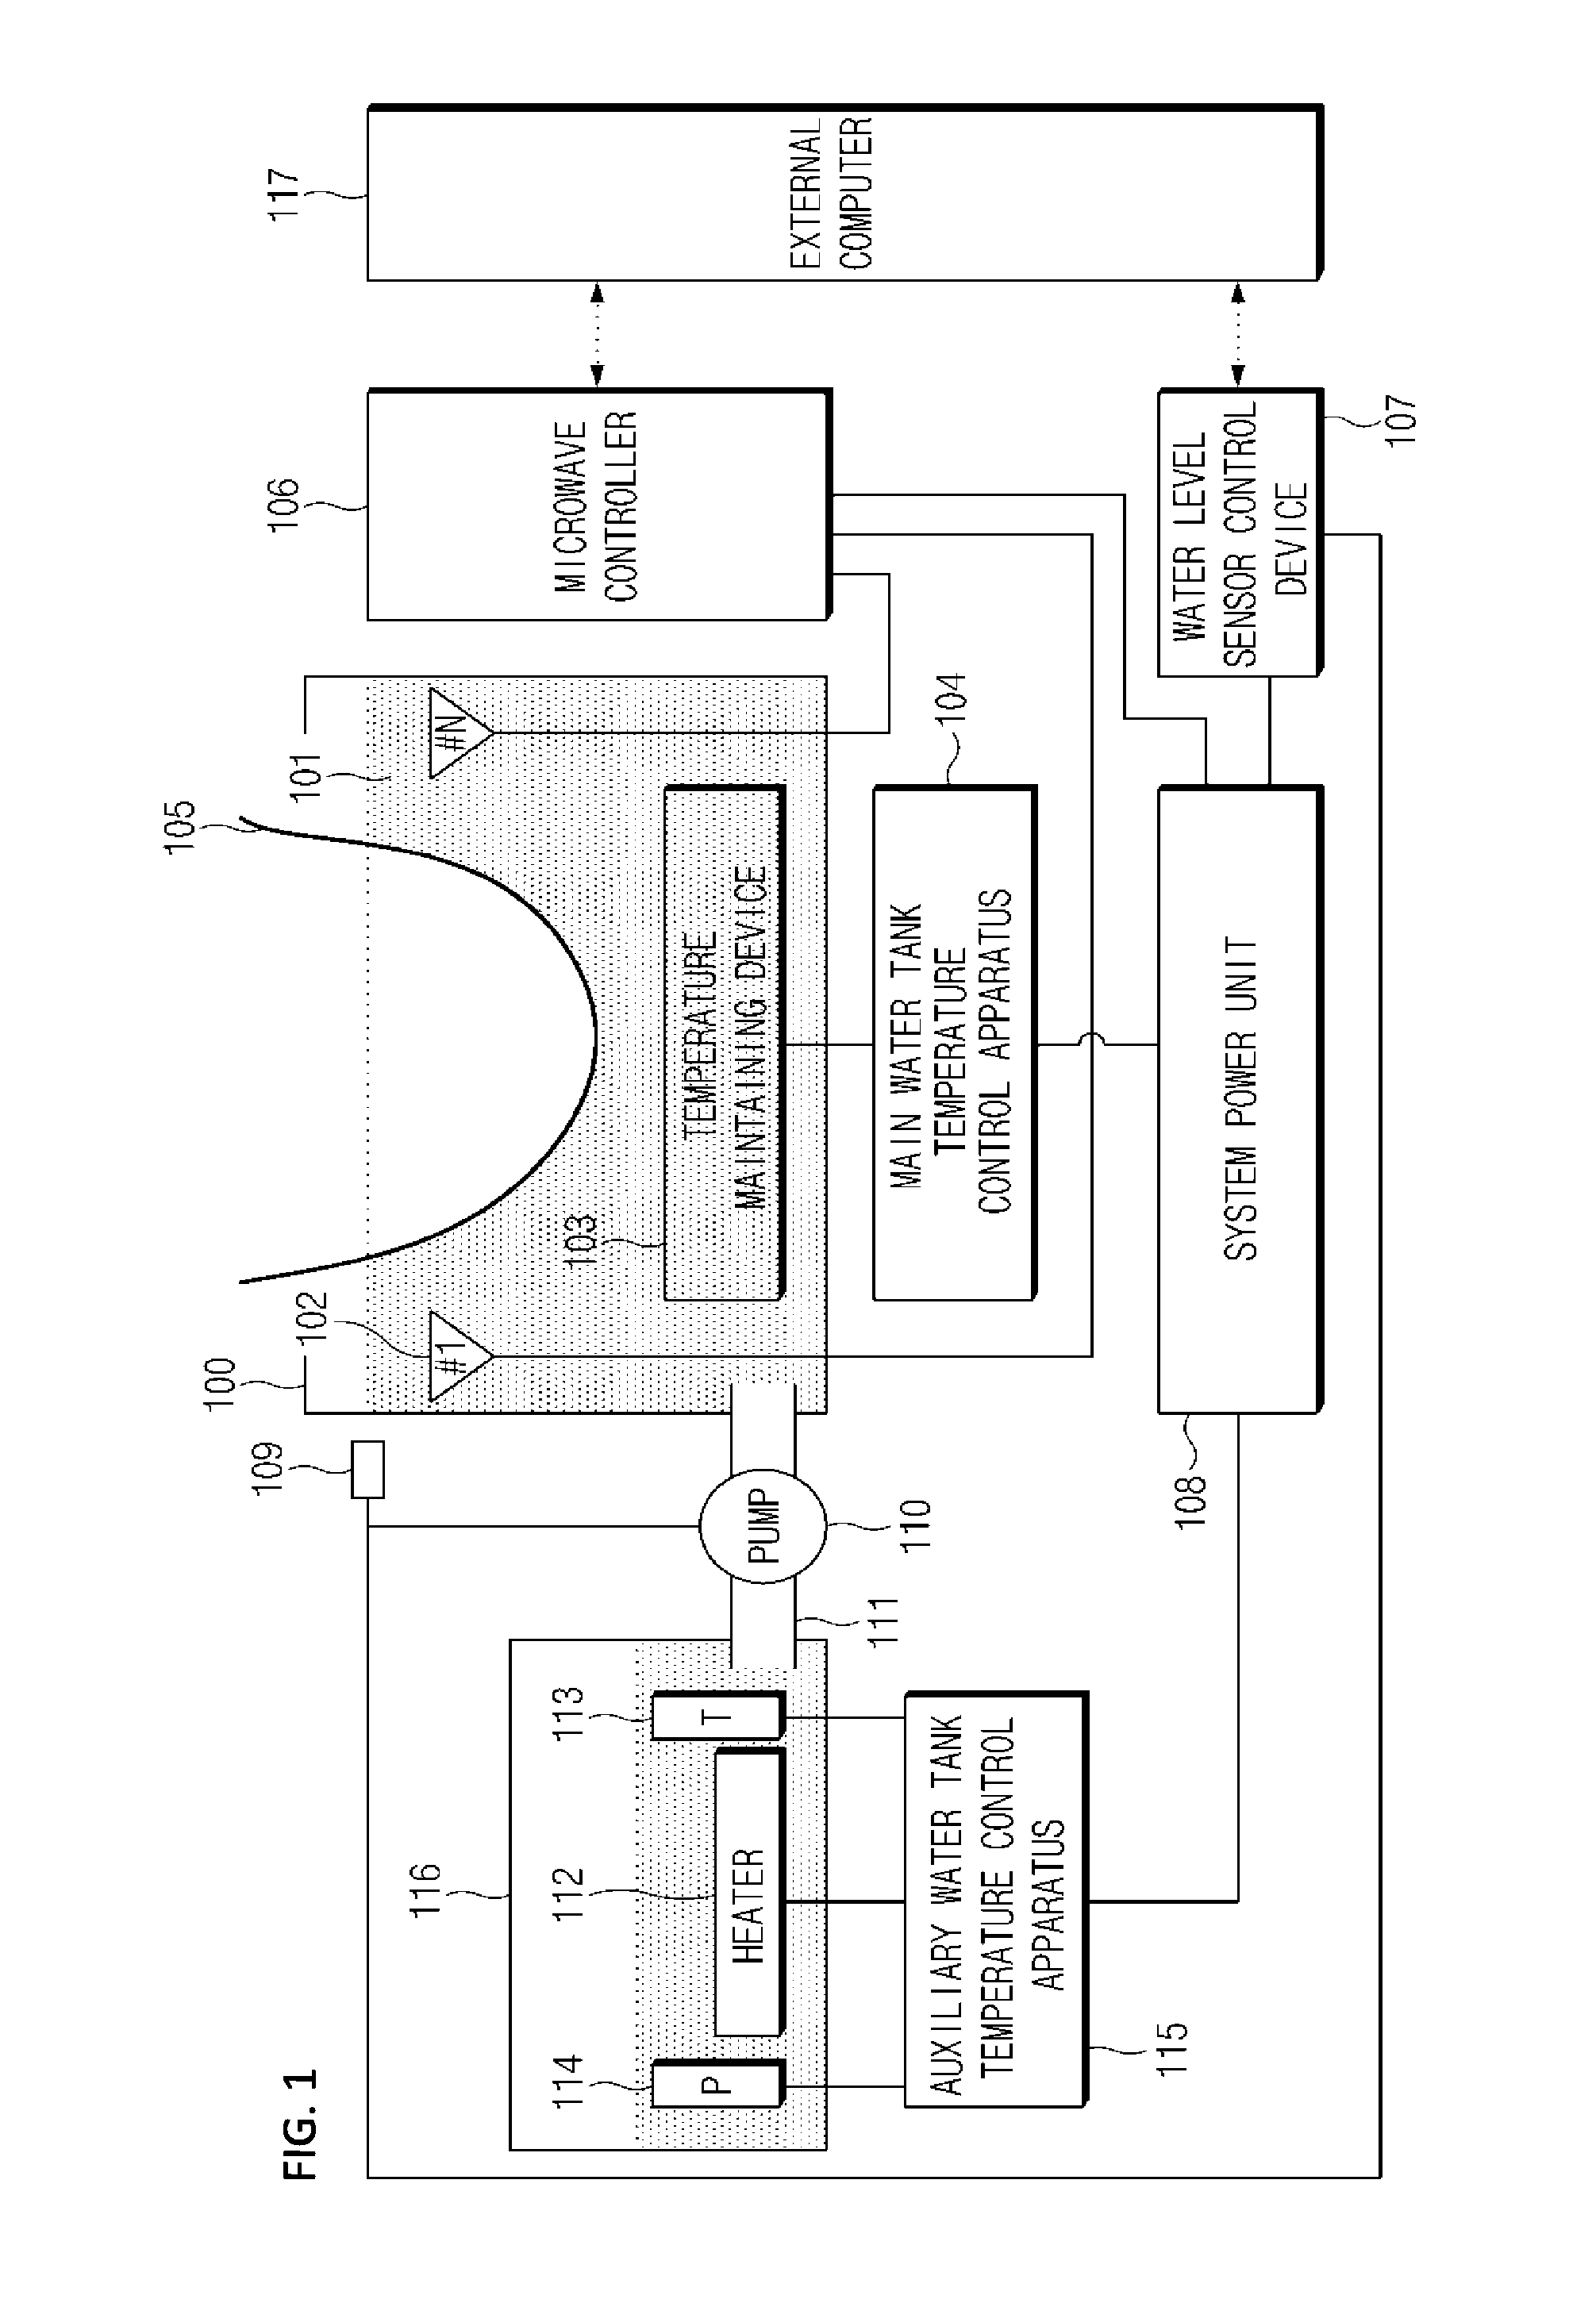 Temperature control apparatus and method in microwave imaging system